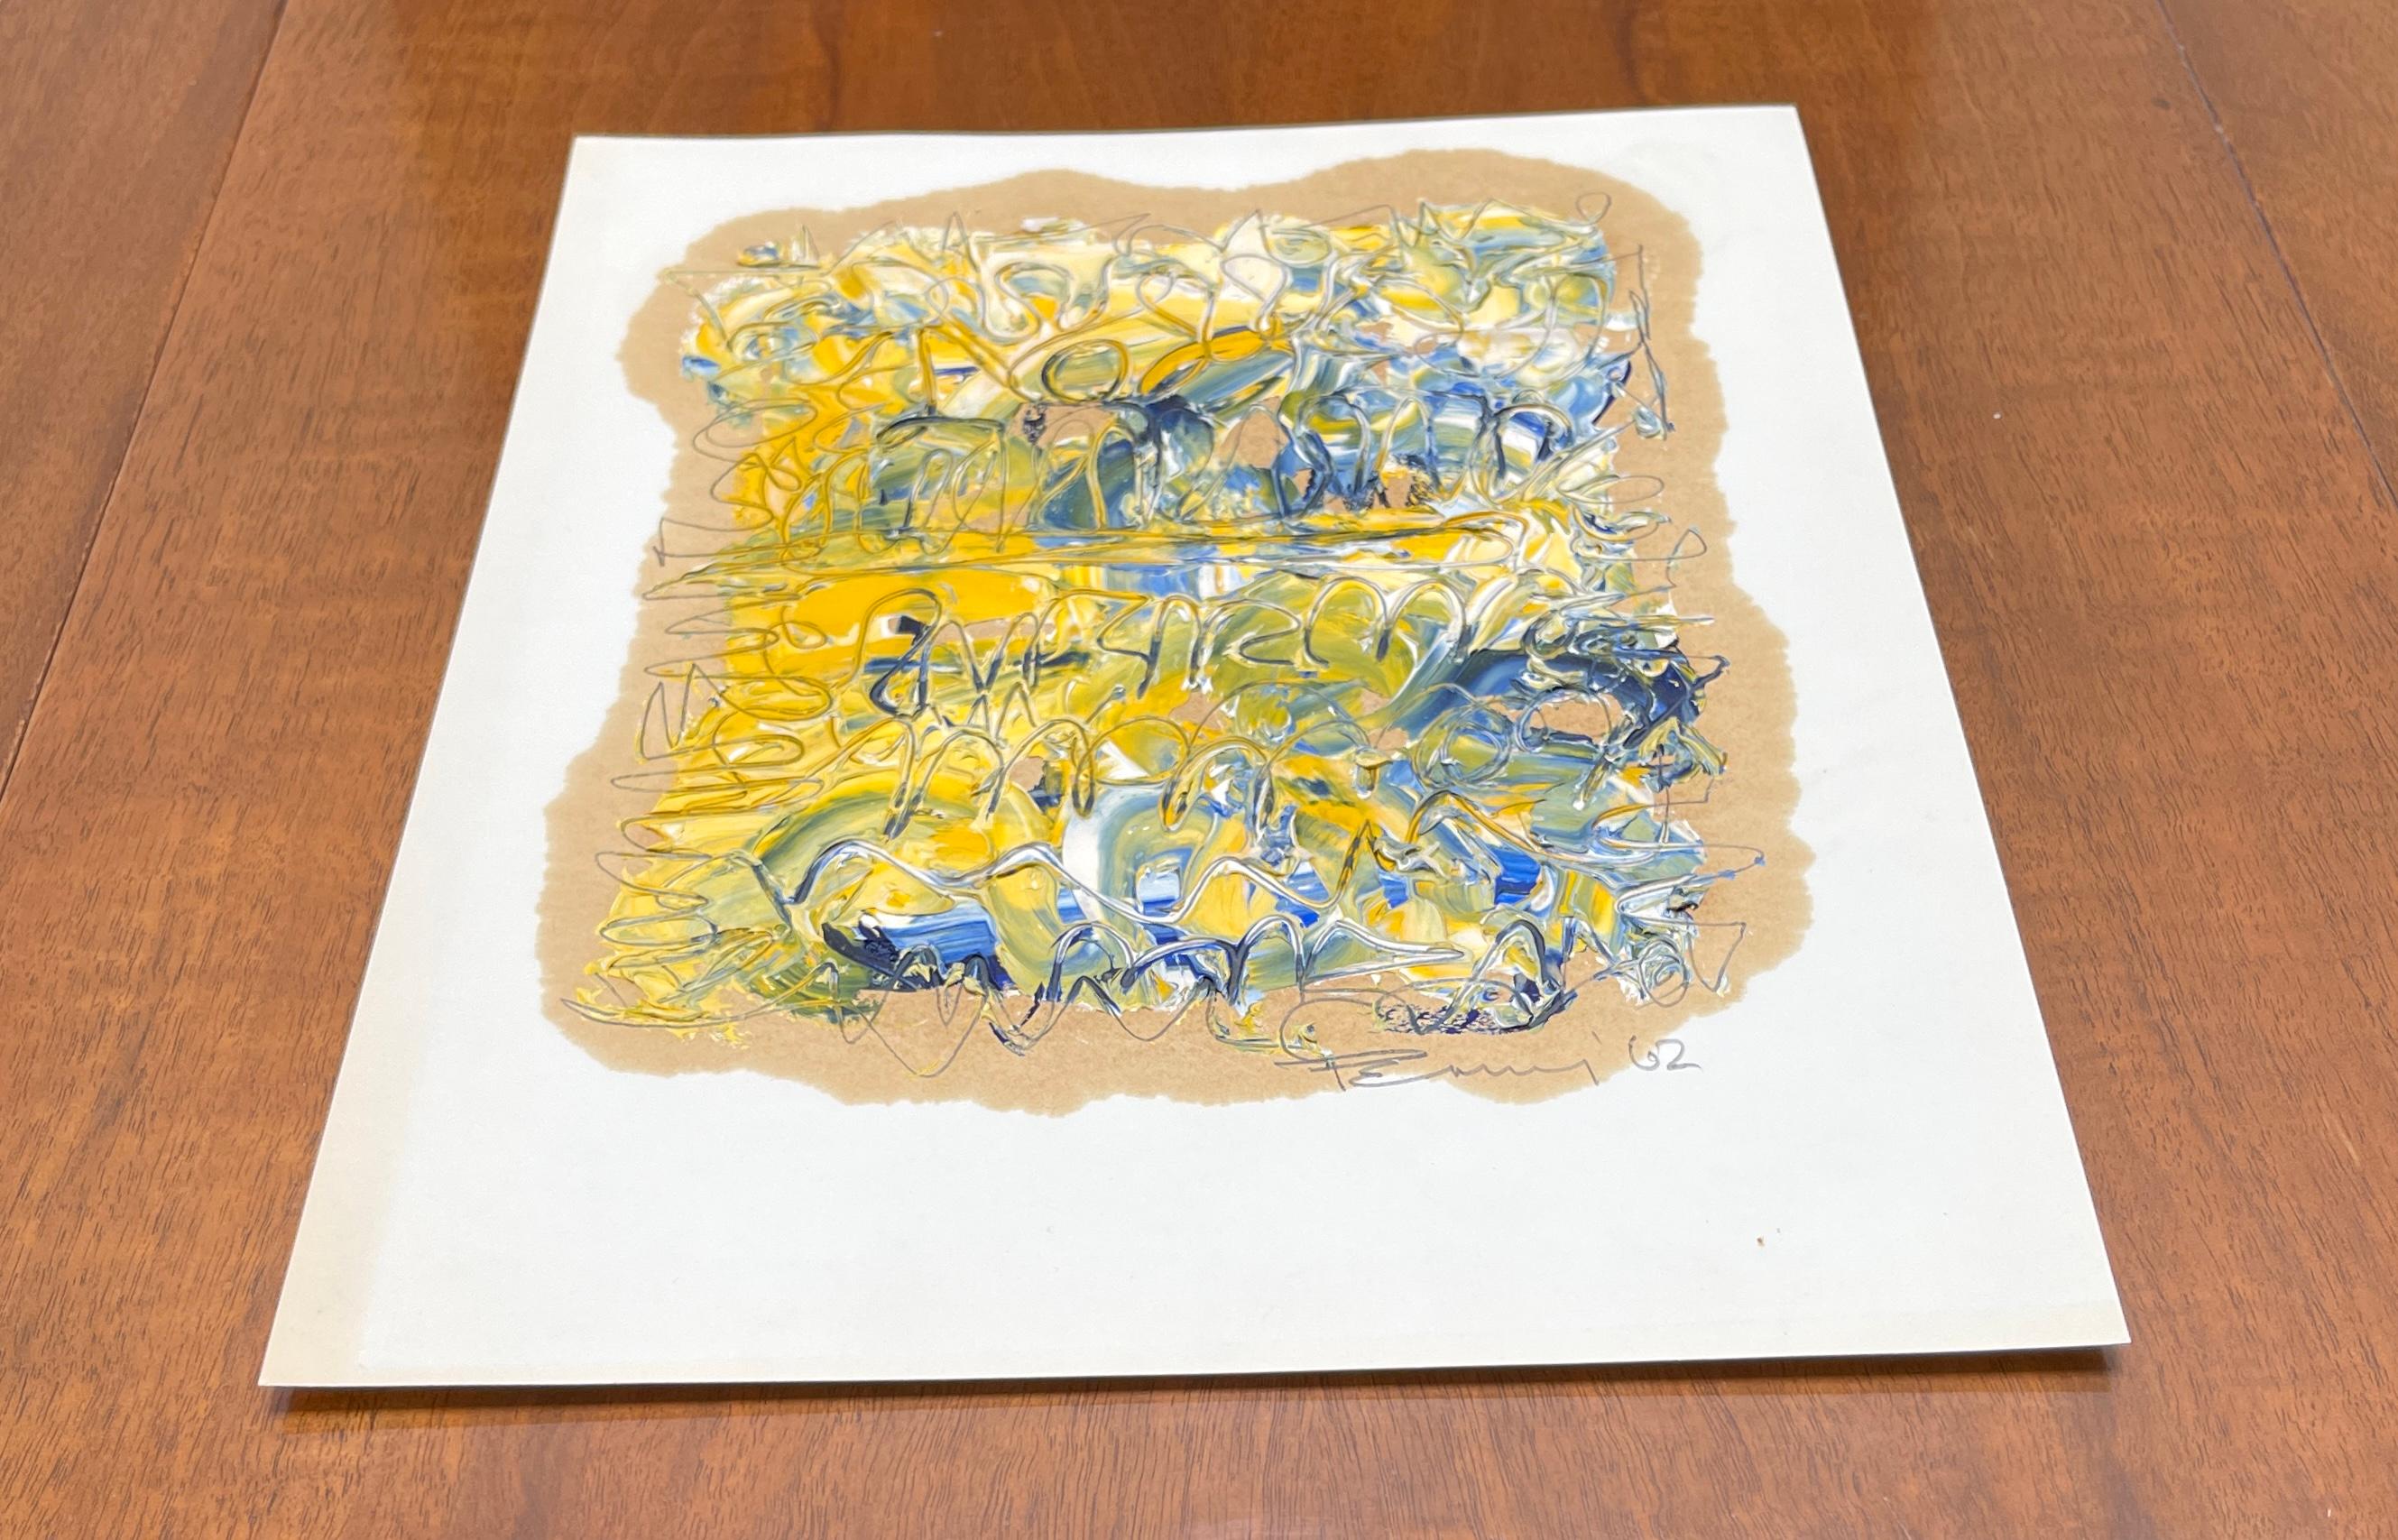 Original textured painting by Aubrey Penny.
Signed and Dated 62

Aubrey Penny (American 1917-2000) was an innovative California abstract artist who worked in a variety of mediums. Owner of the No-os gallery on La Cienega Boulevard, Los Angeles, CA,